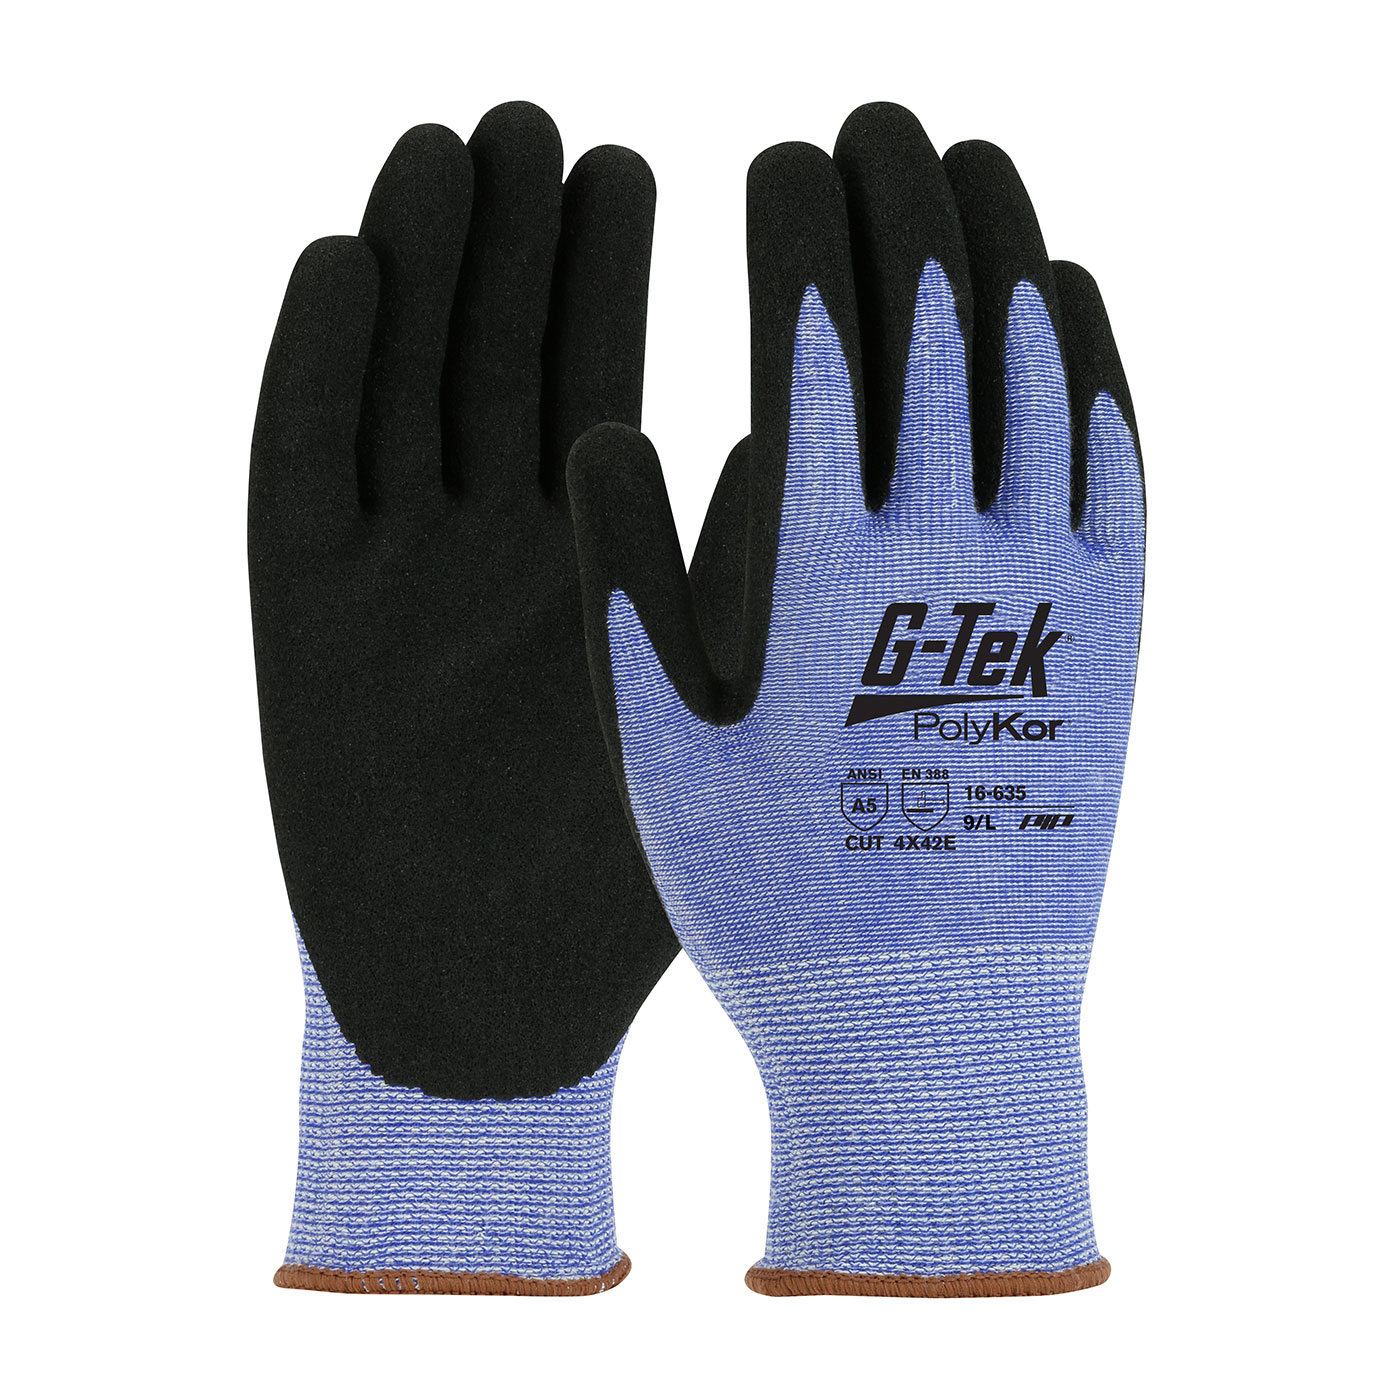 PIP 16-635/XL G-Tek PolyKor Seamless Knit PolyKor Blended Glove with Nitrile Coated MicroSurface Grip on Palm & Fingers - X-Large PID-16635XL